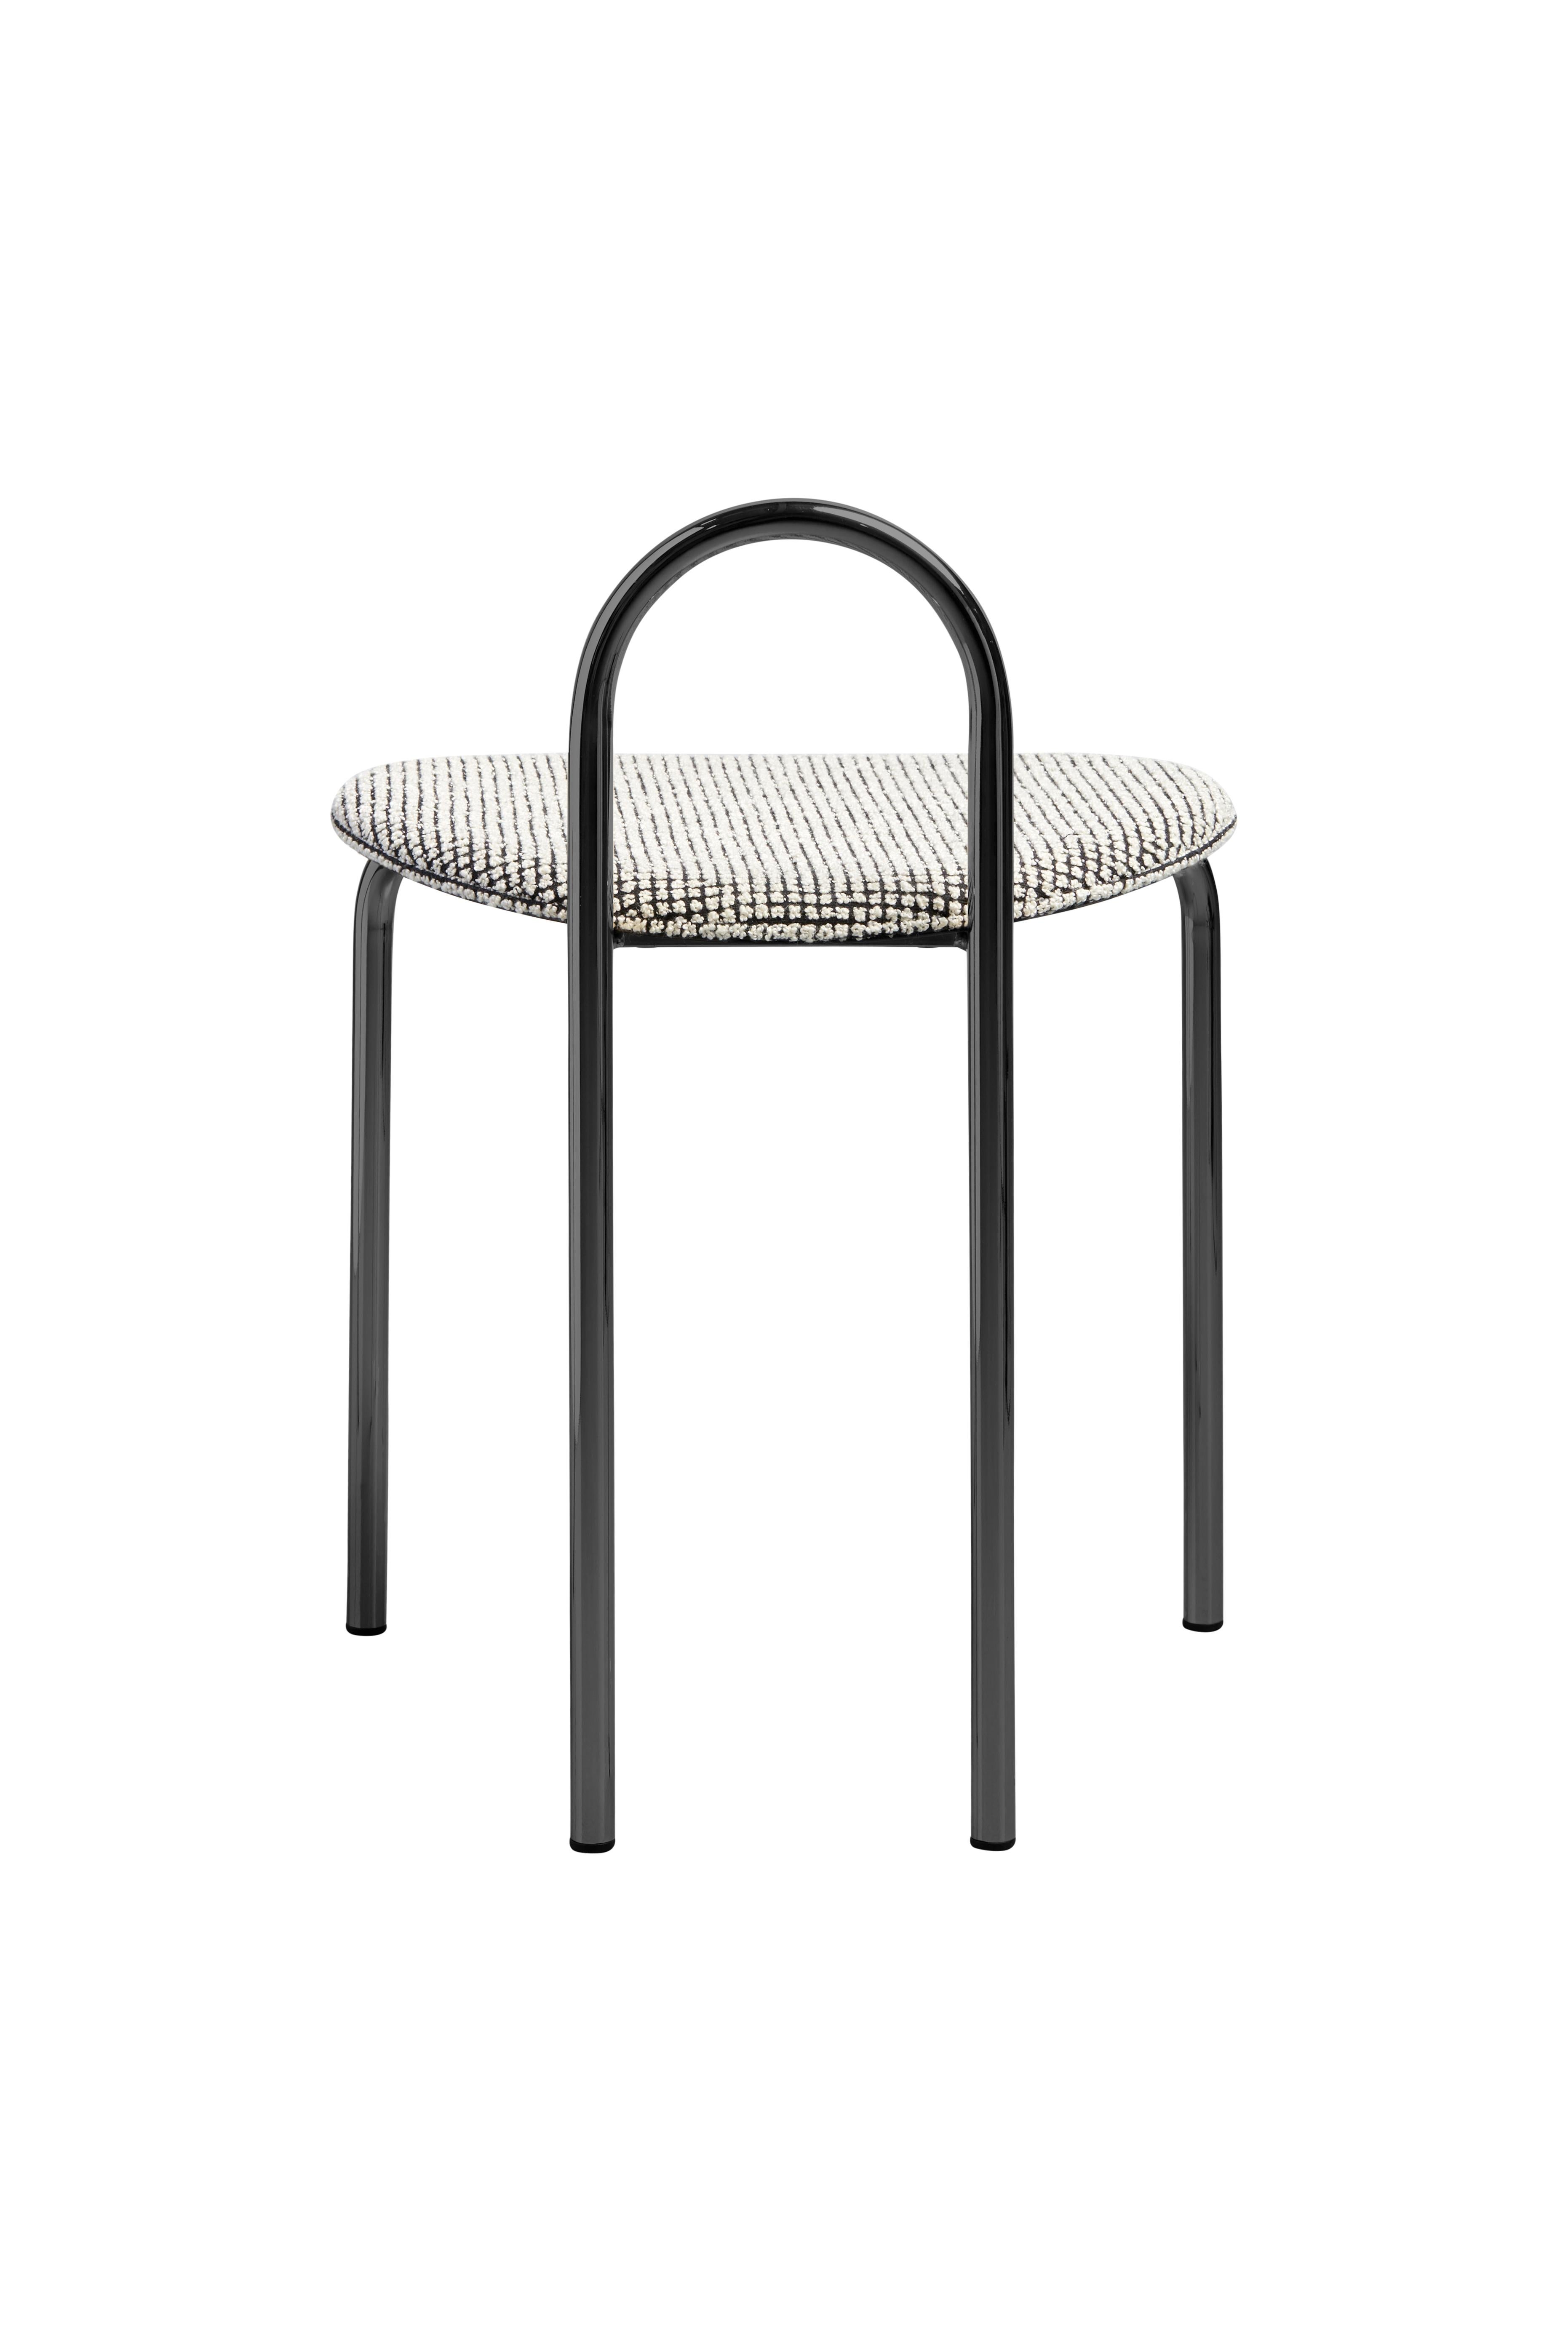 Italian SP01 Michelle Stool Upholstered in Black Chrome, Made in Italy For Sale